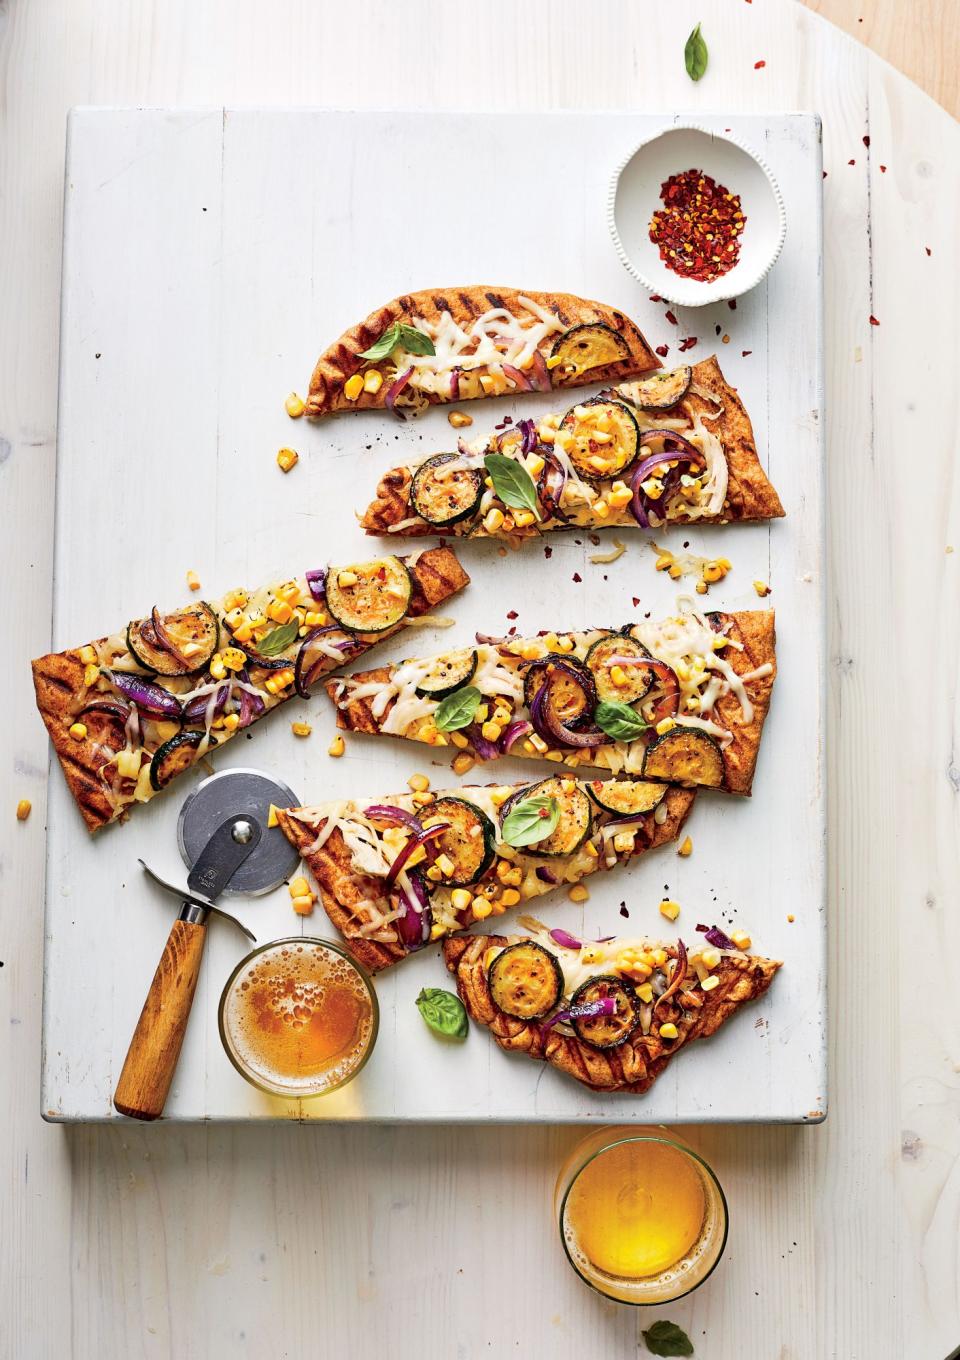 Grilled Pizza with Summer Veggies and Smoked Chicken